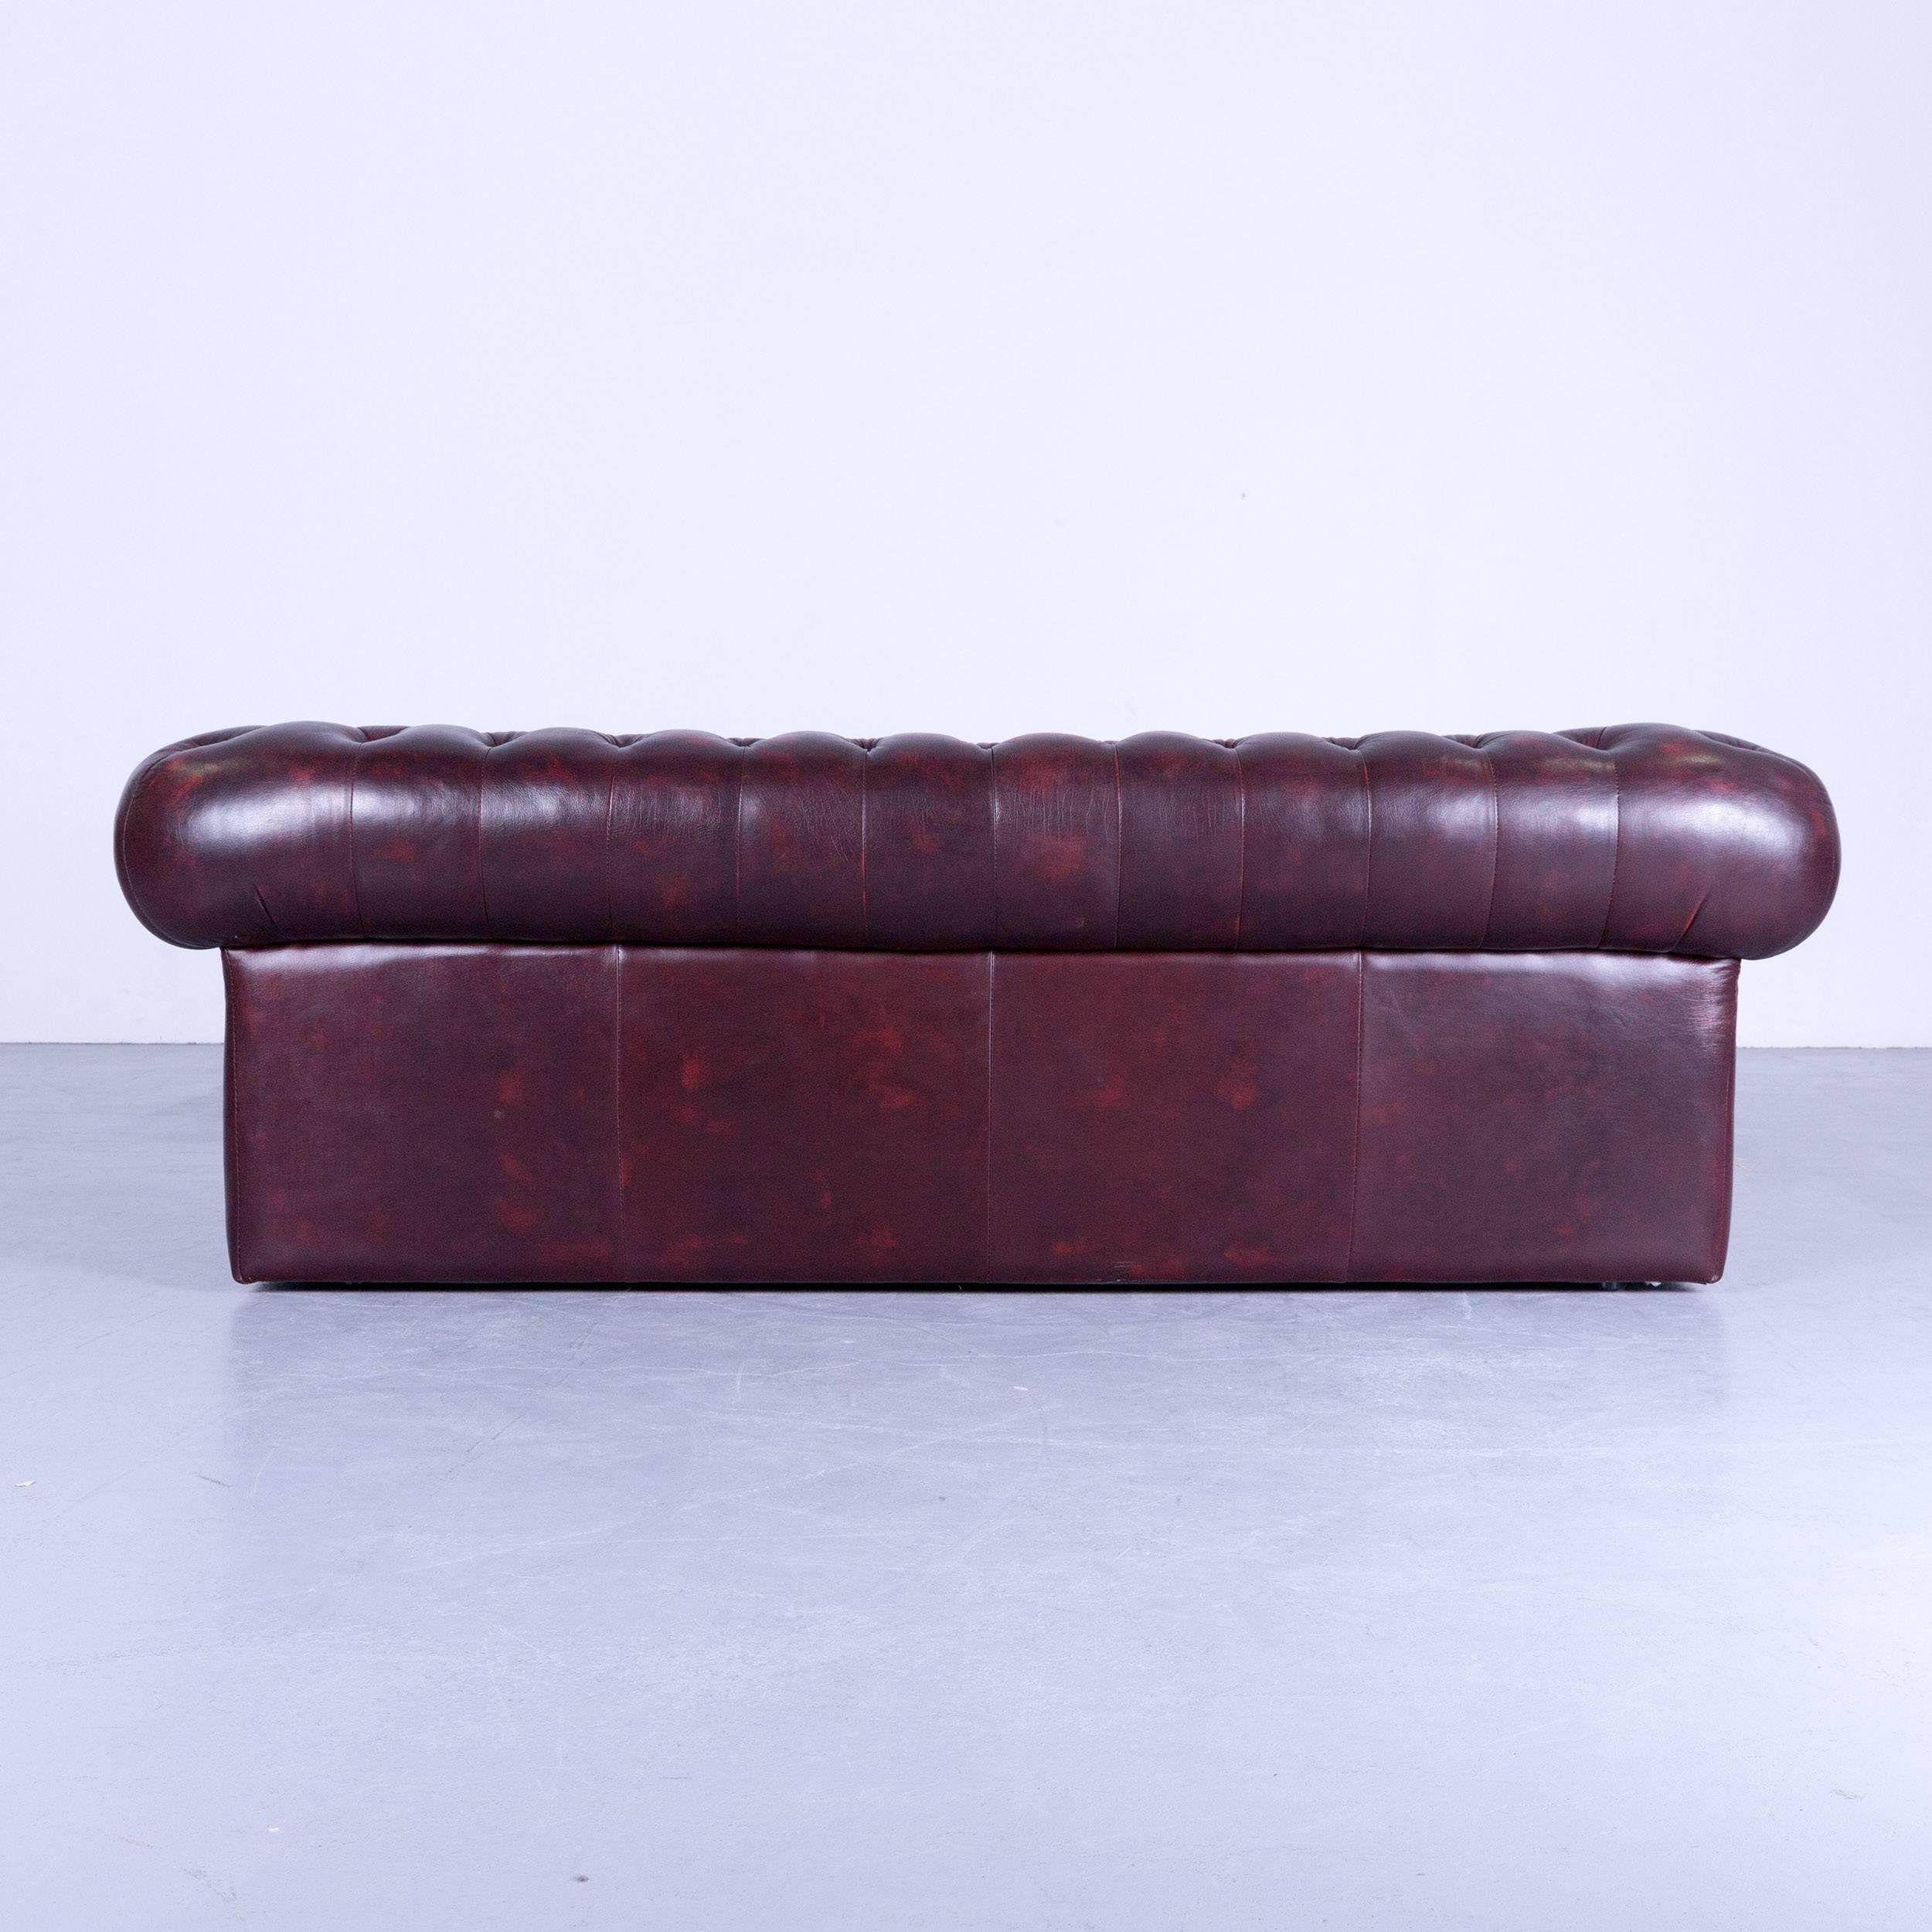 Chesterfield Three-Seat Sofa Red Leather Couch Vintage Retro Rivets 1